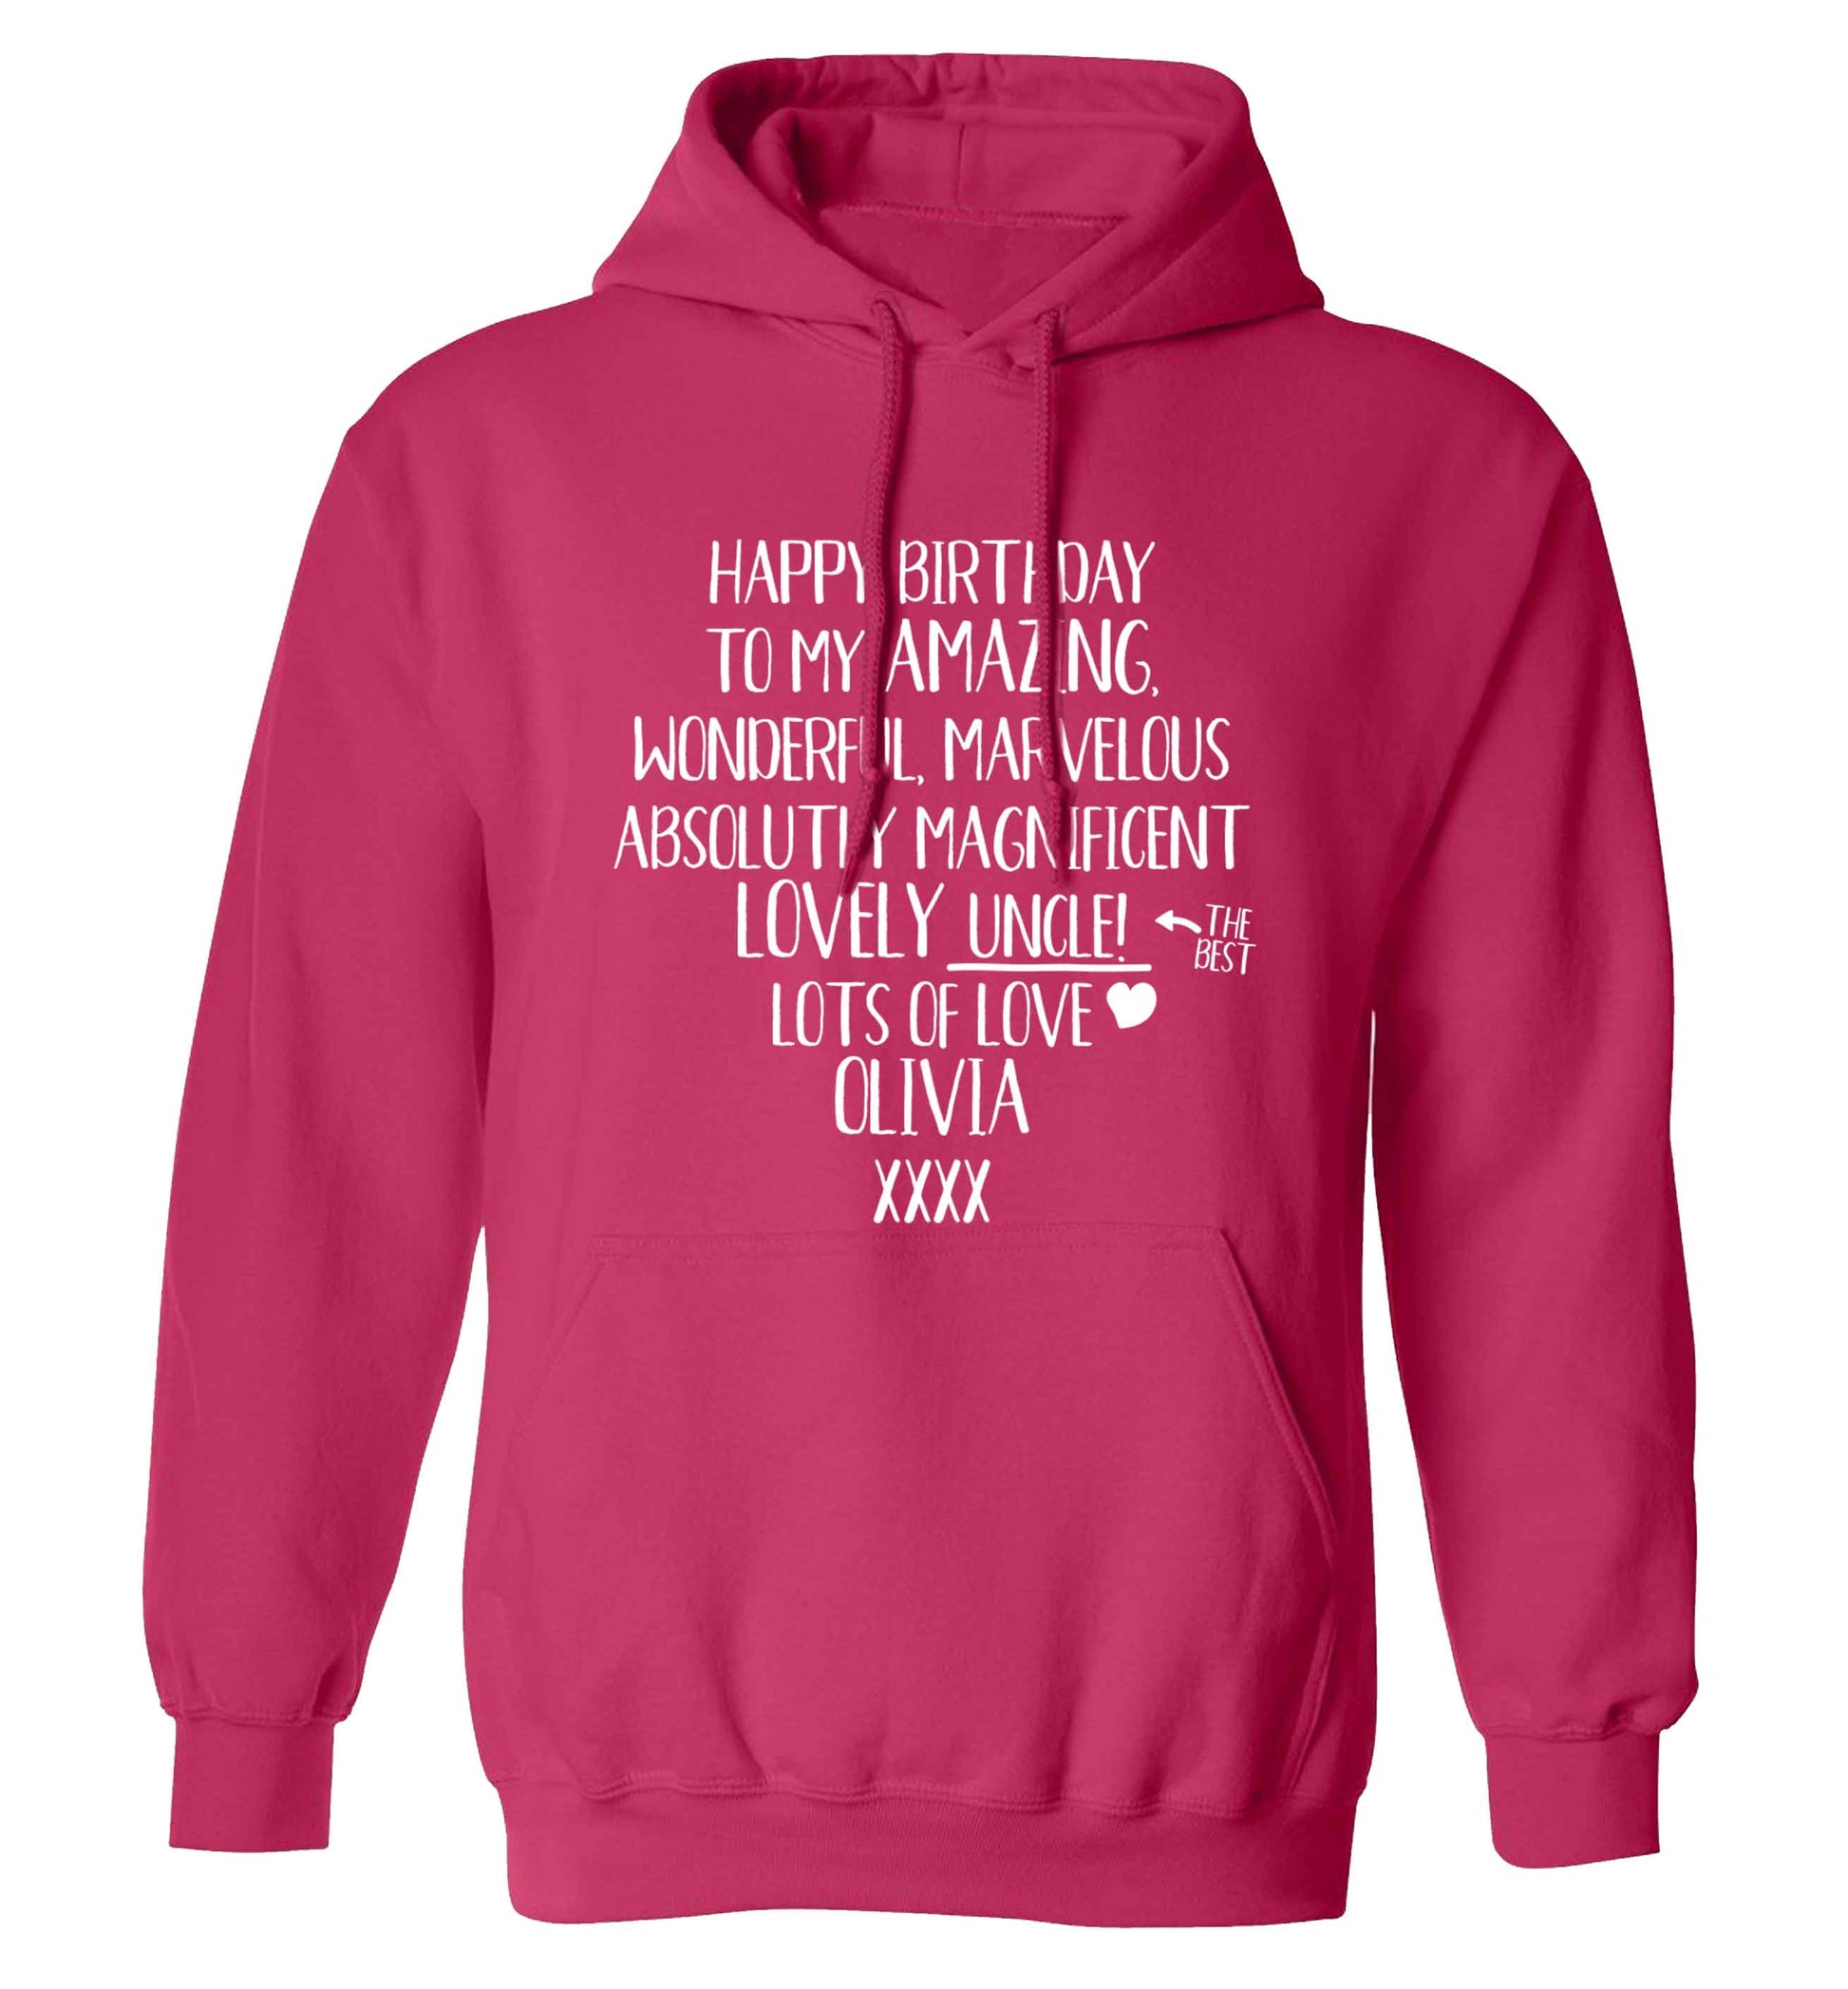 Personalised happy birthday to my amazing, wonderful, lovely uncle adults unisex pink hoodie 2XL